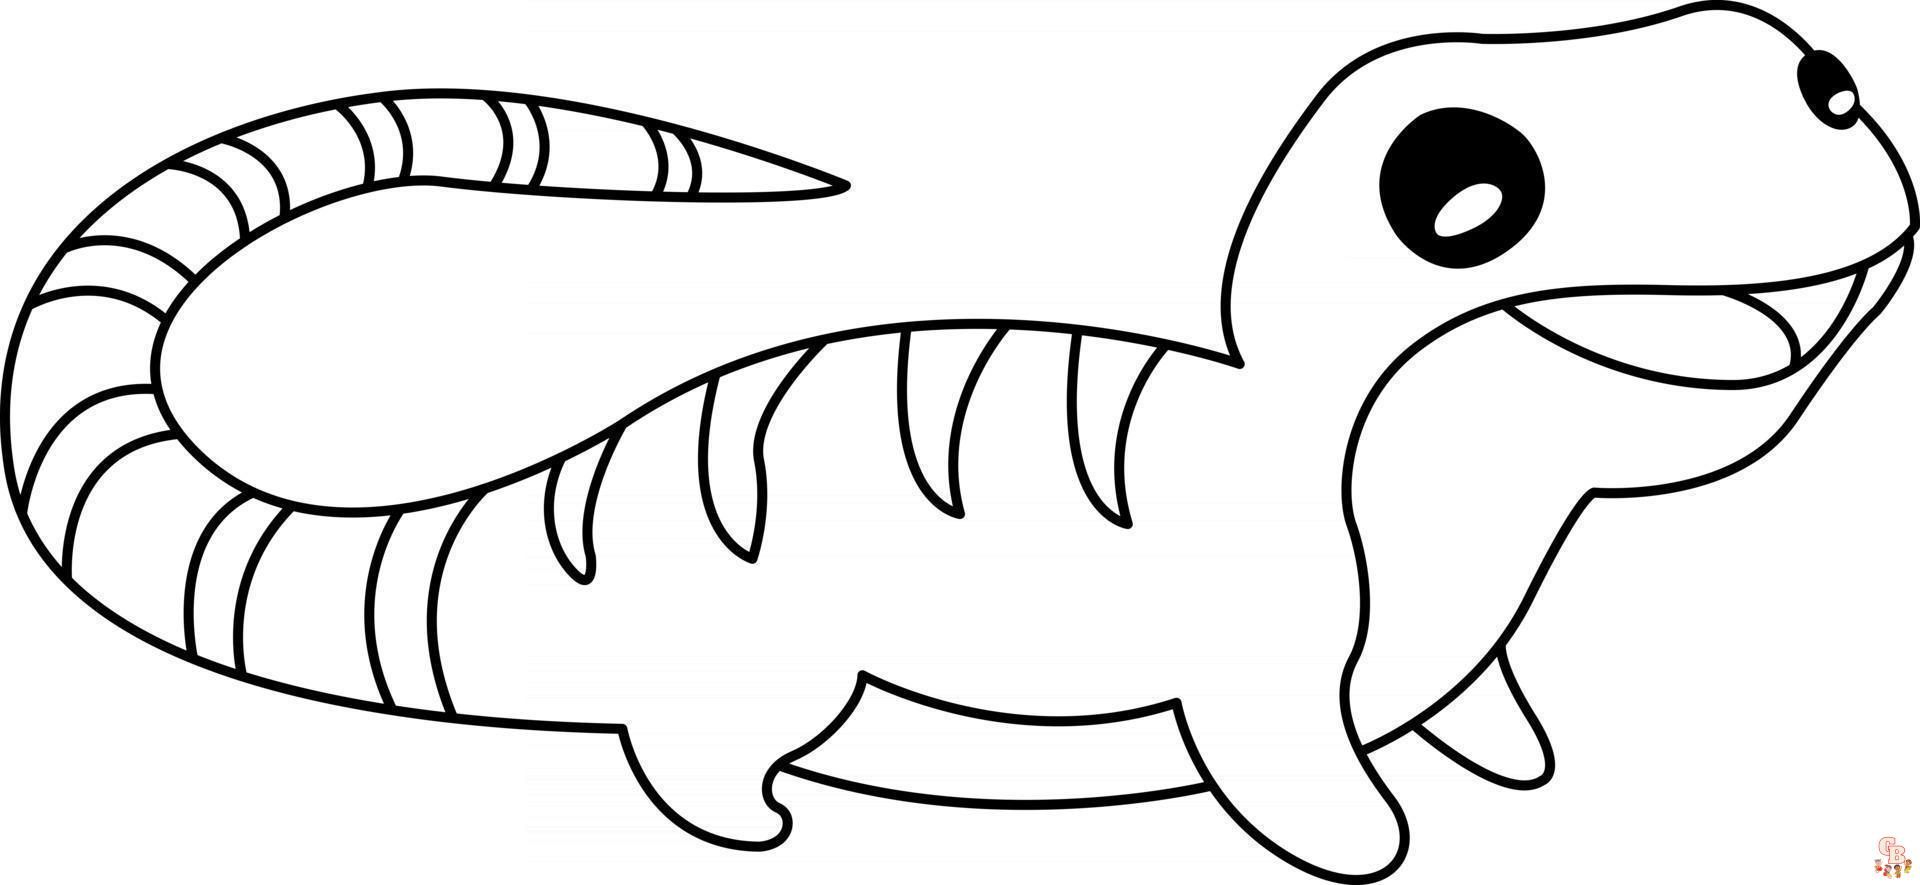 Exciting lizard coloring pages for kids adults